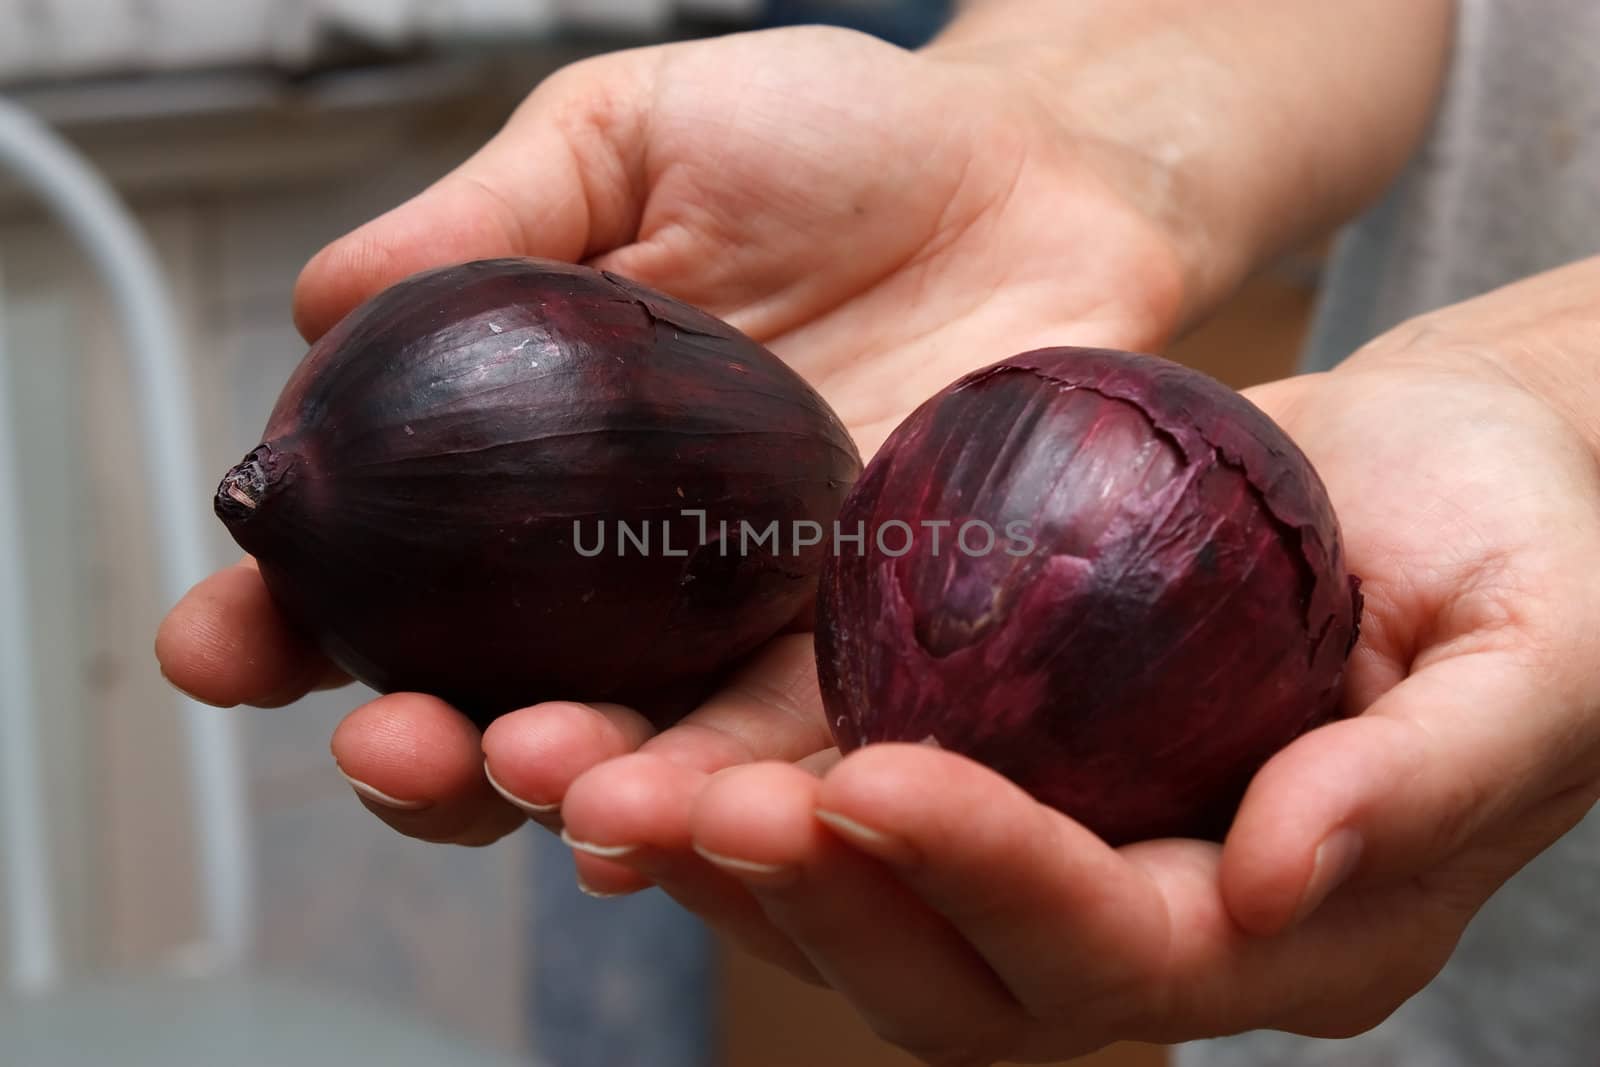 The two onion in hands.